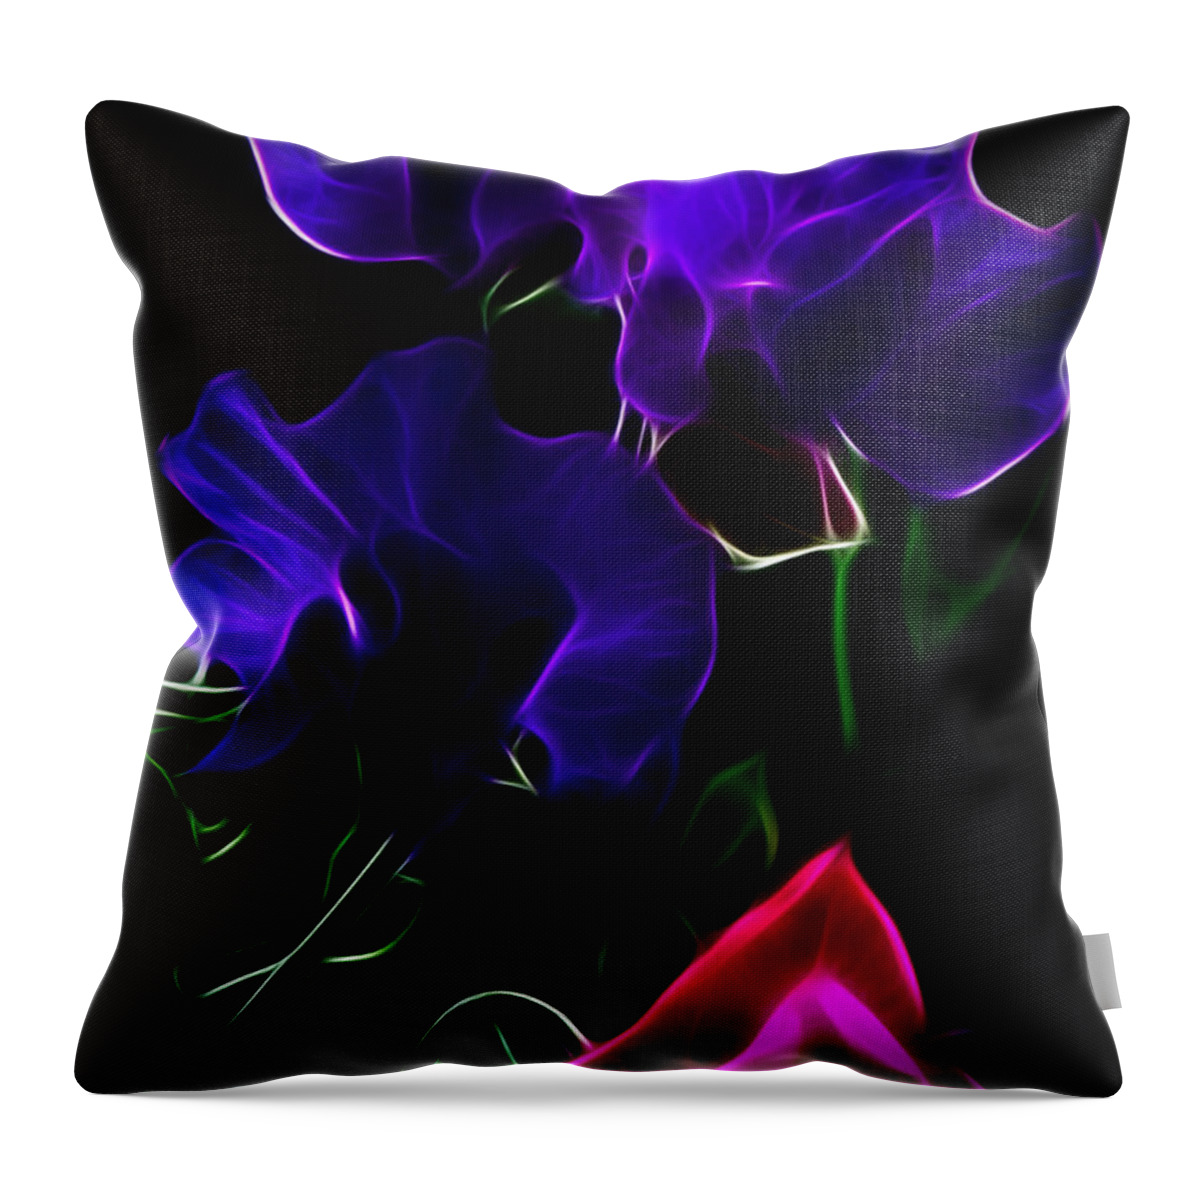 Sweet Peas Throw Pillow featuring the photograph Glowing Sweet Peas by Yvonne Johnstone